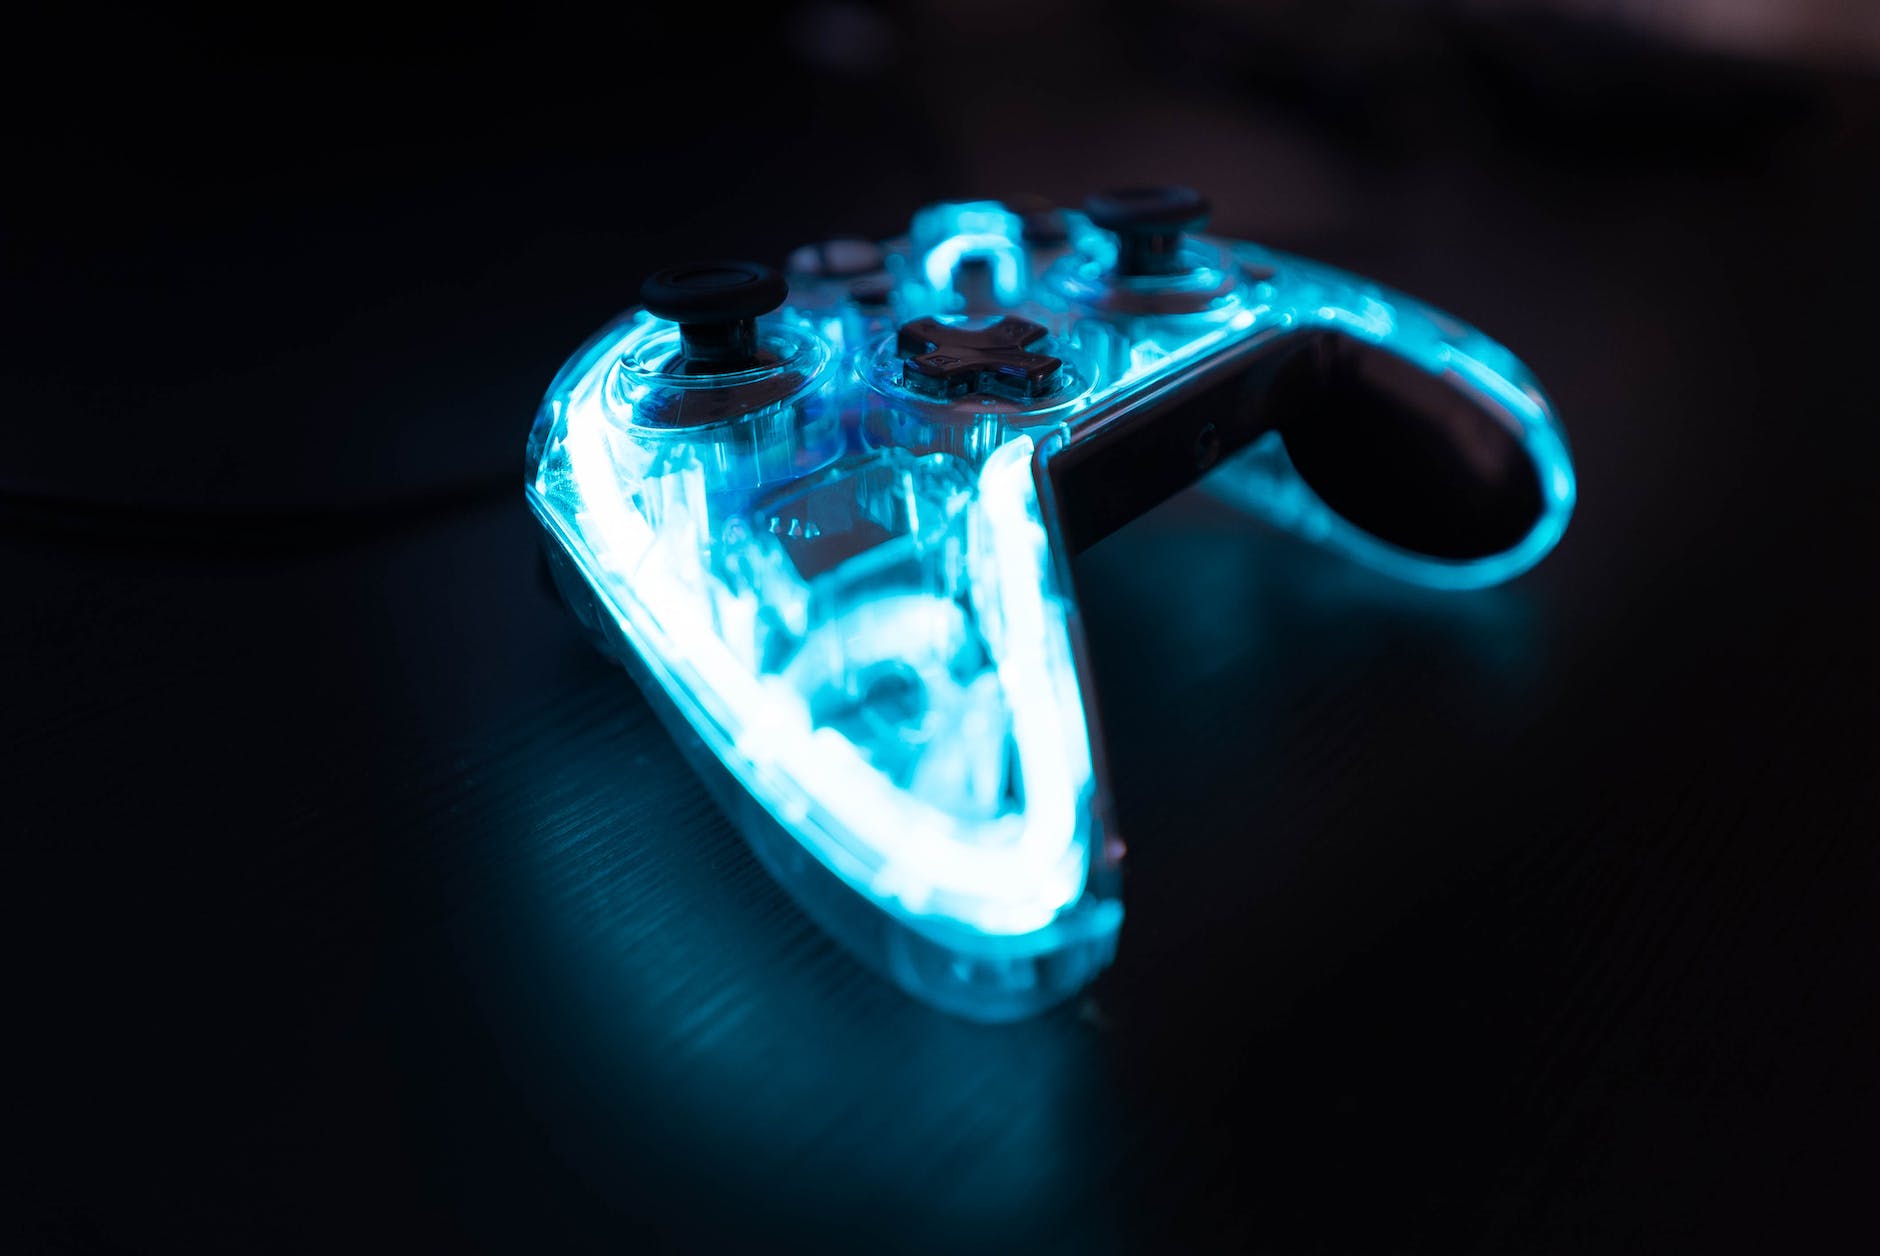 led game controller on table